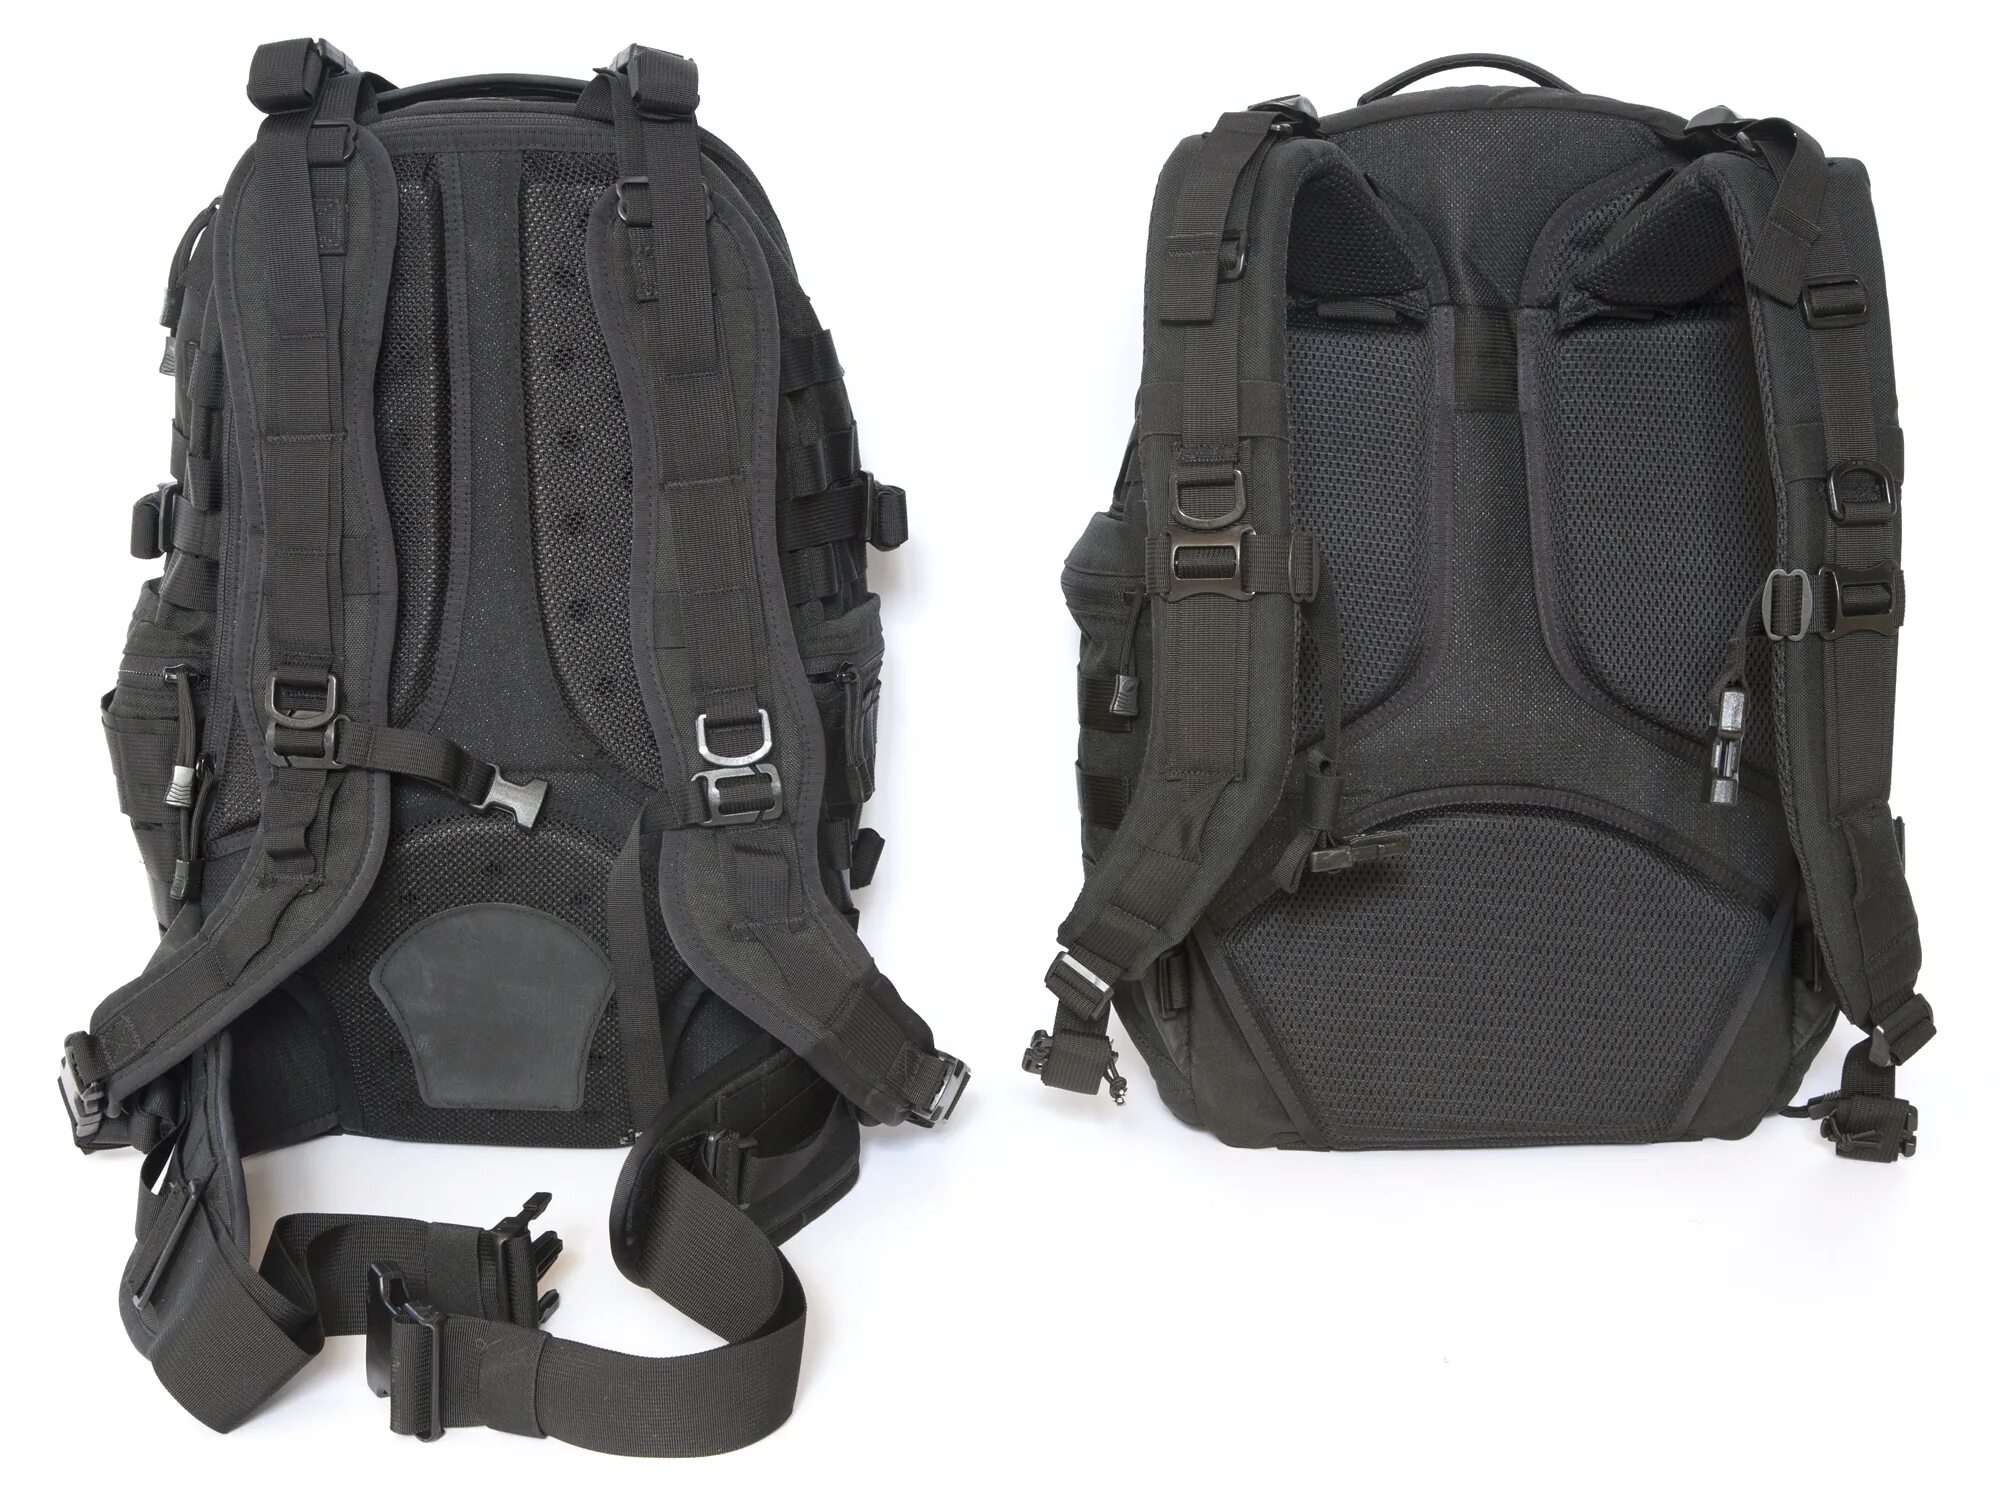 Рюкзак Triple aught Design fast Pack EDC. Tad Gear fast Pack EDC. Tad fast Pack EDC LITESPEED v2. Tad TL-1801. Pack fast